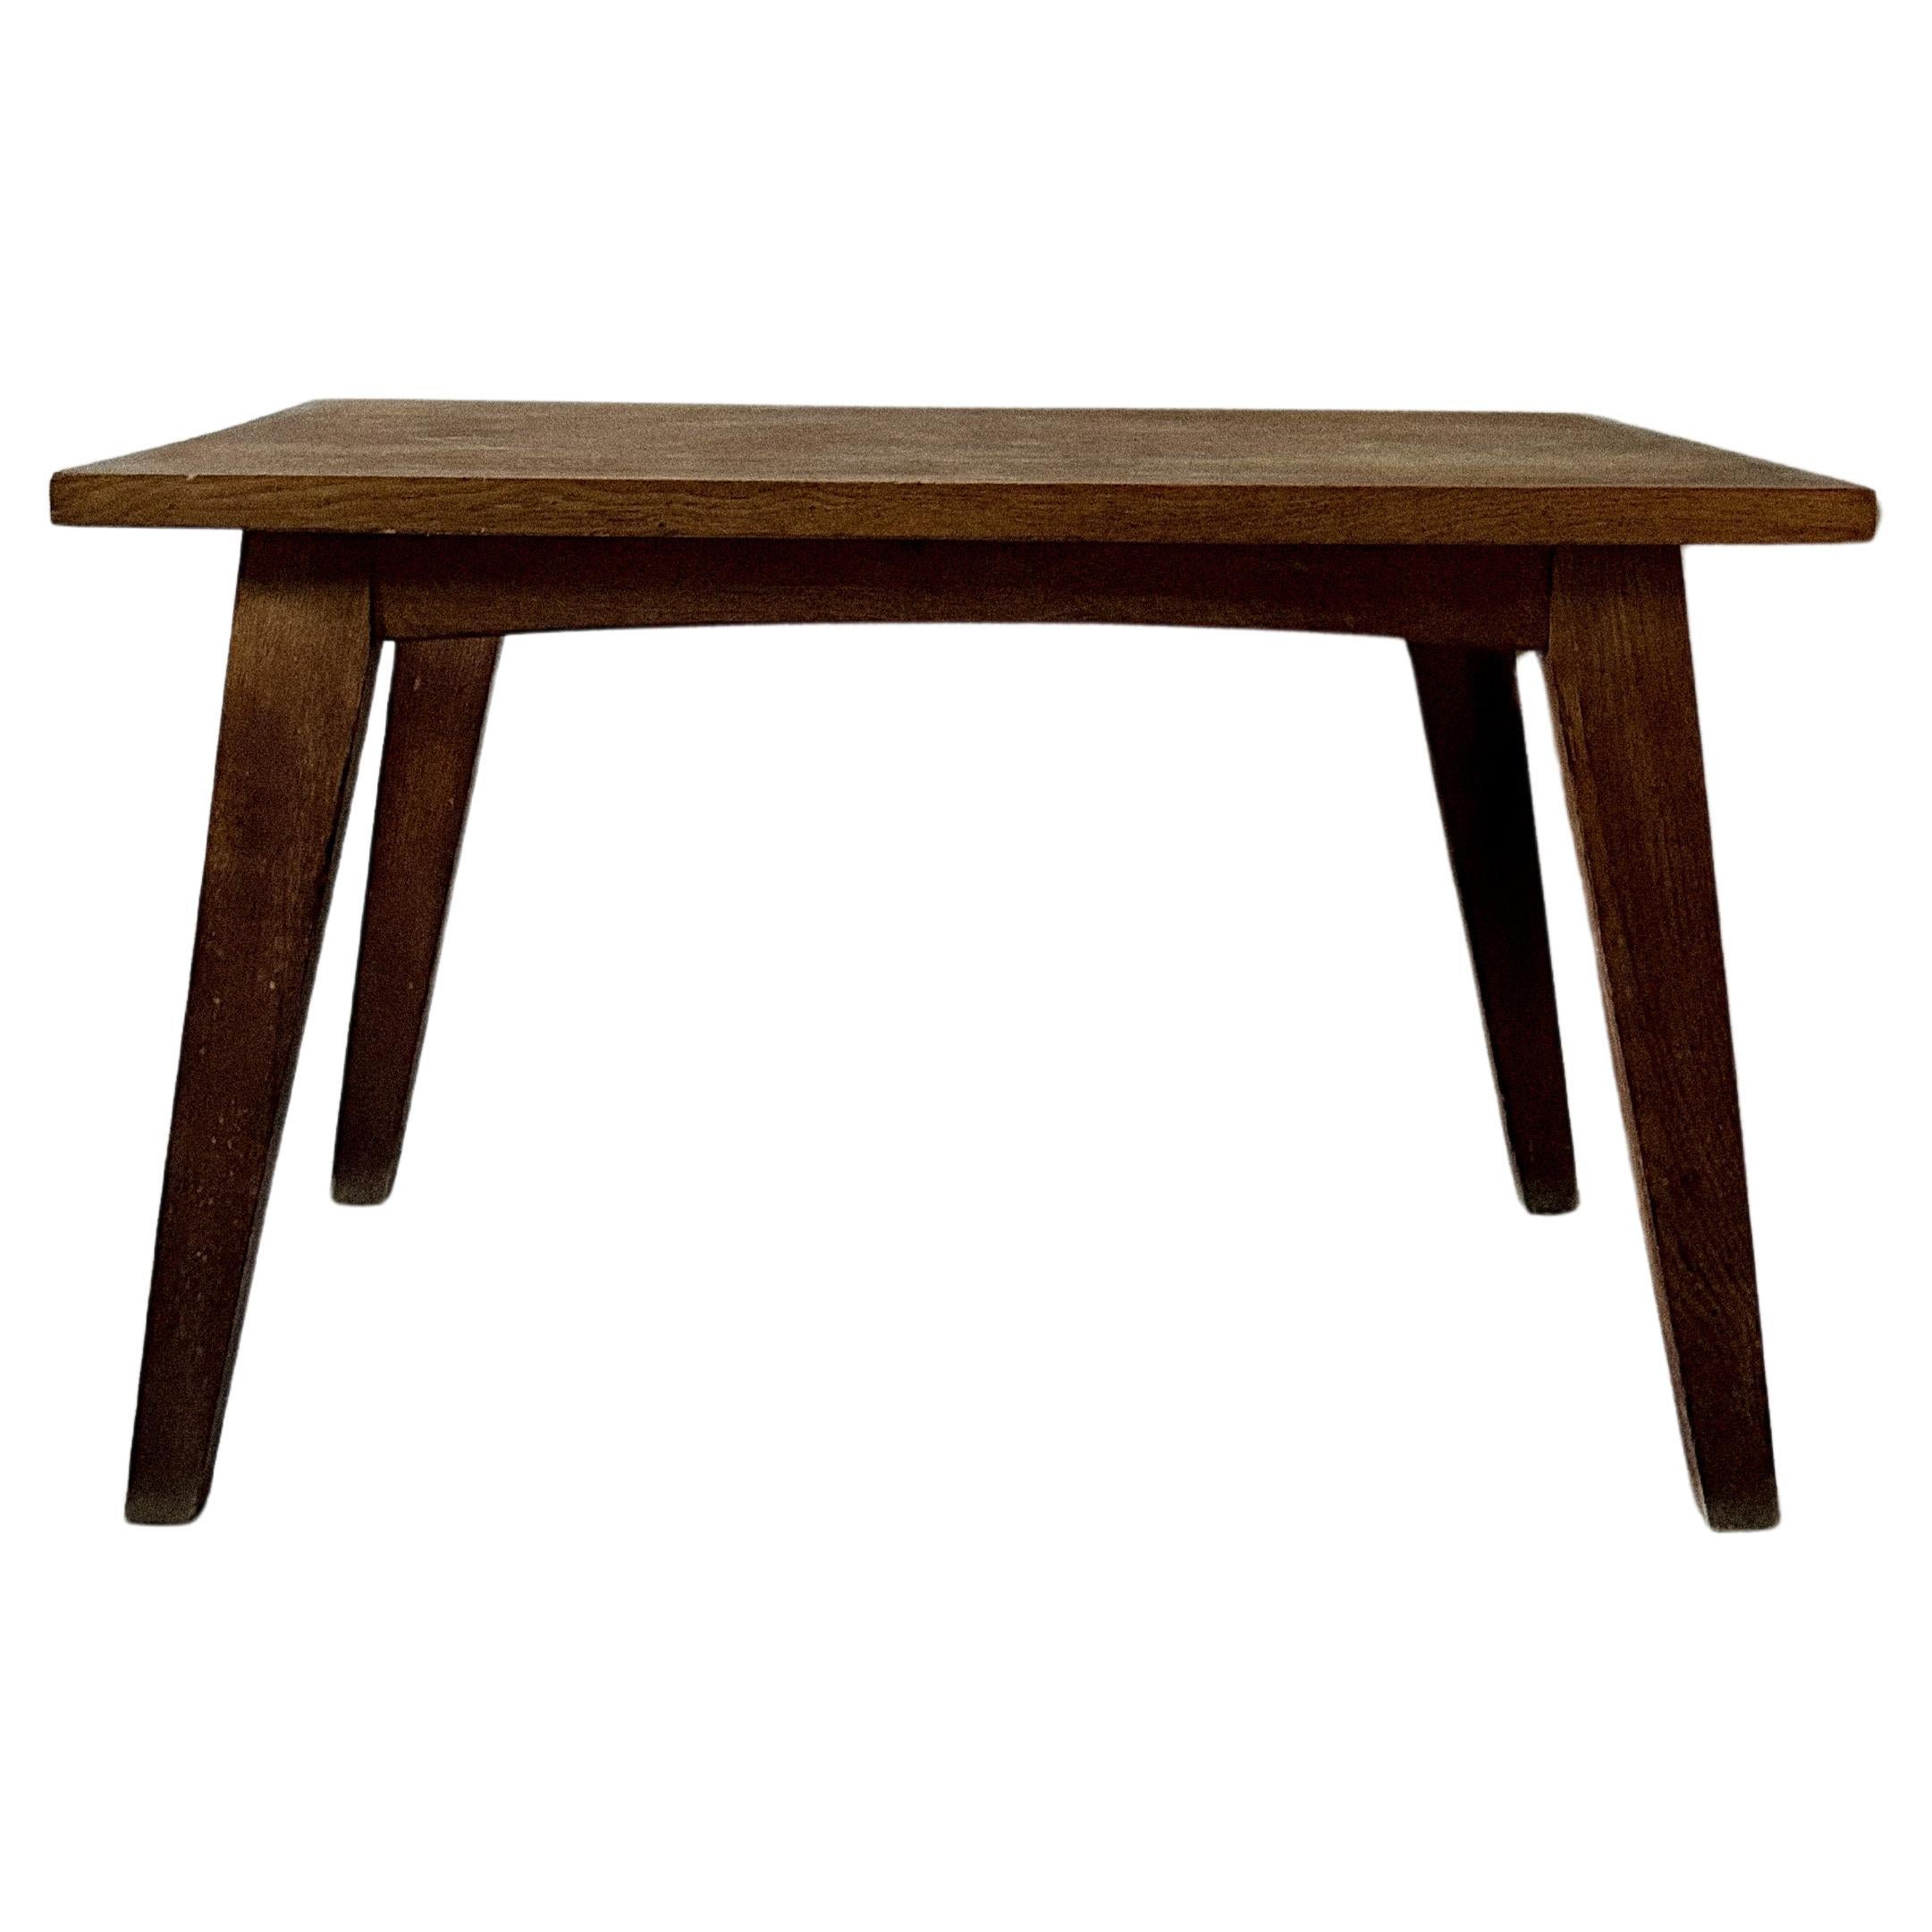 Vintage French Oak Dining Table in Style of Pierre Jeanneret, France, 1950s For Sale